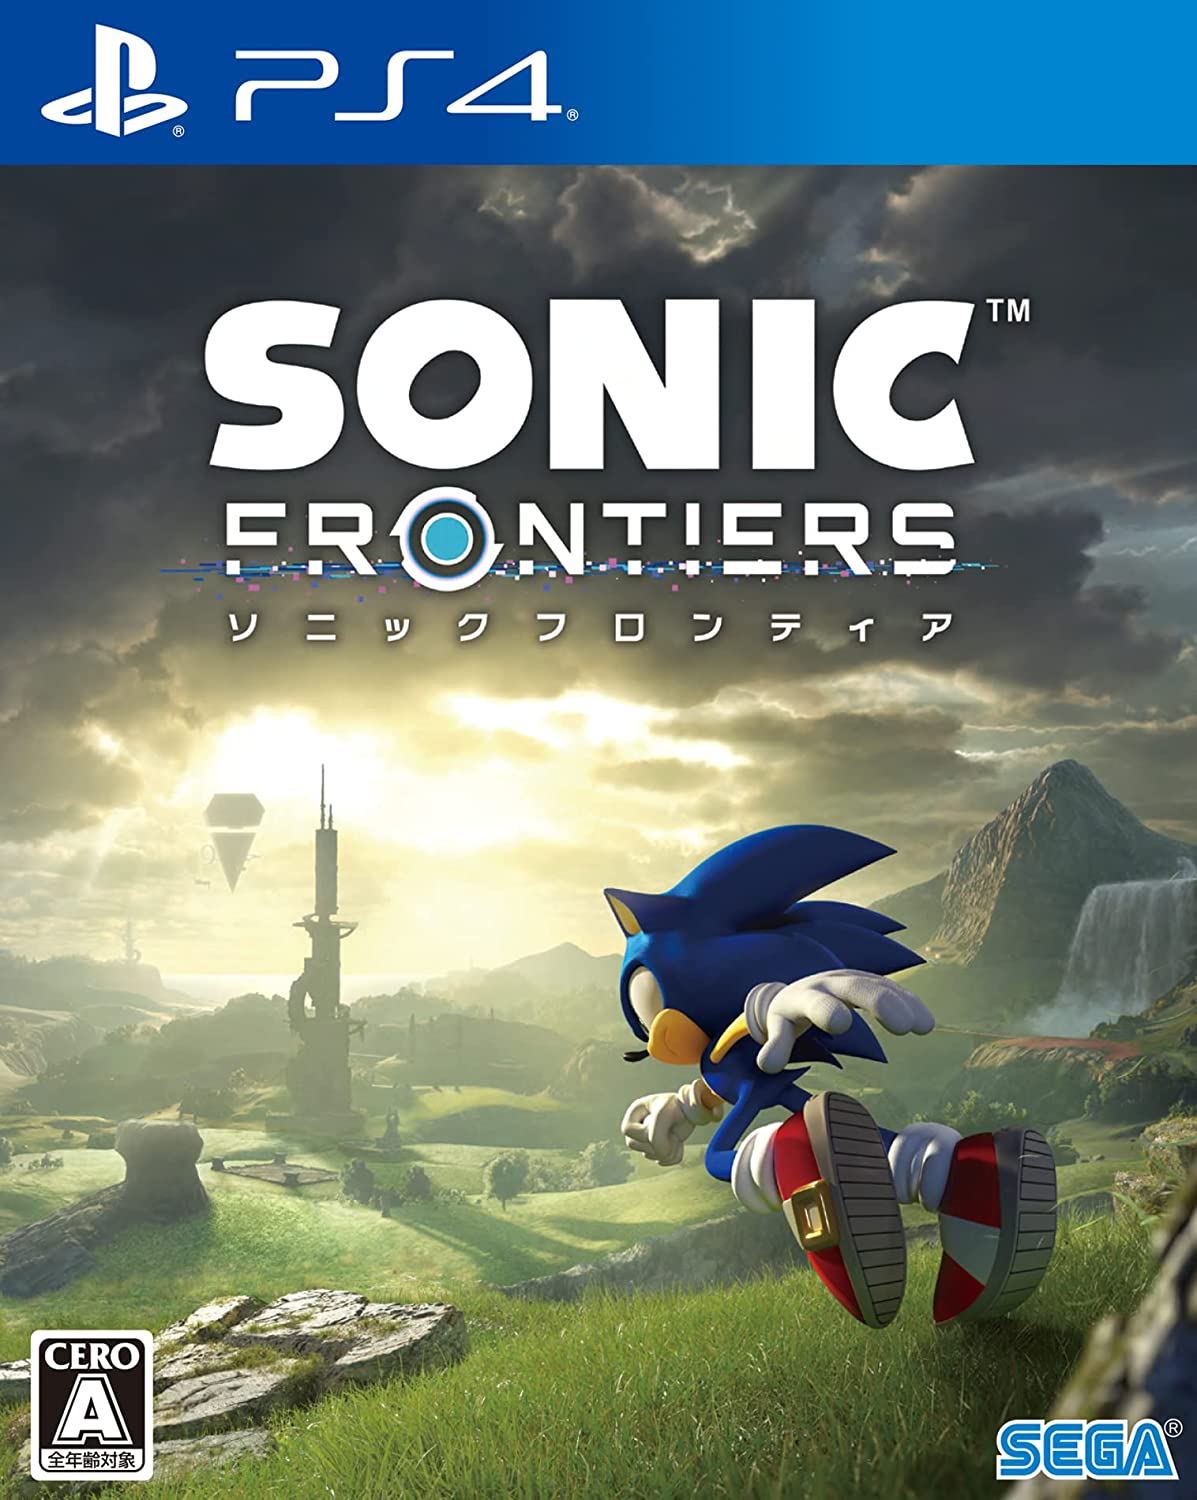 Sonic Frontiers (English) for PlayStation 4